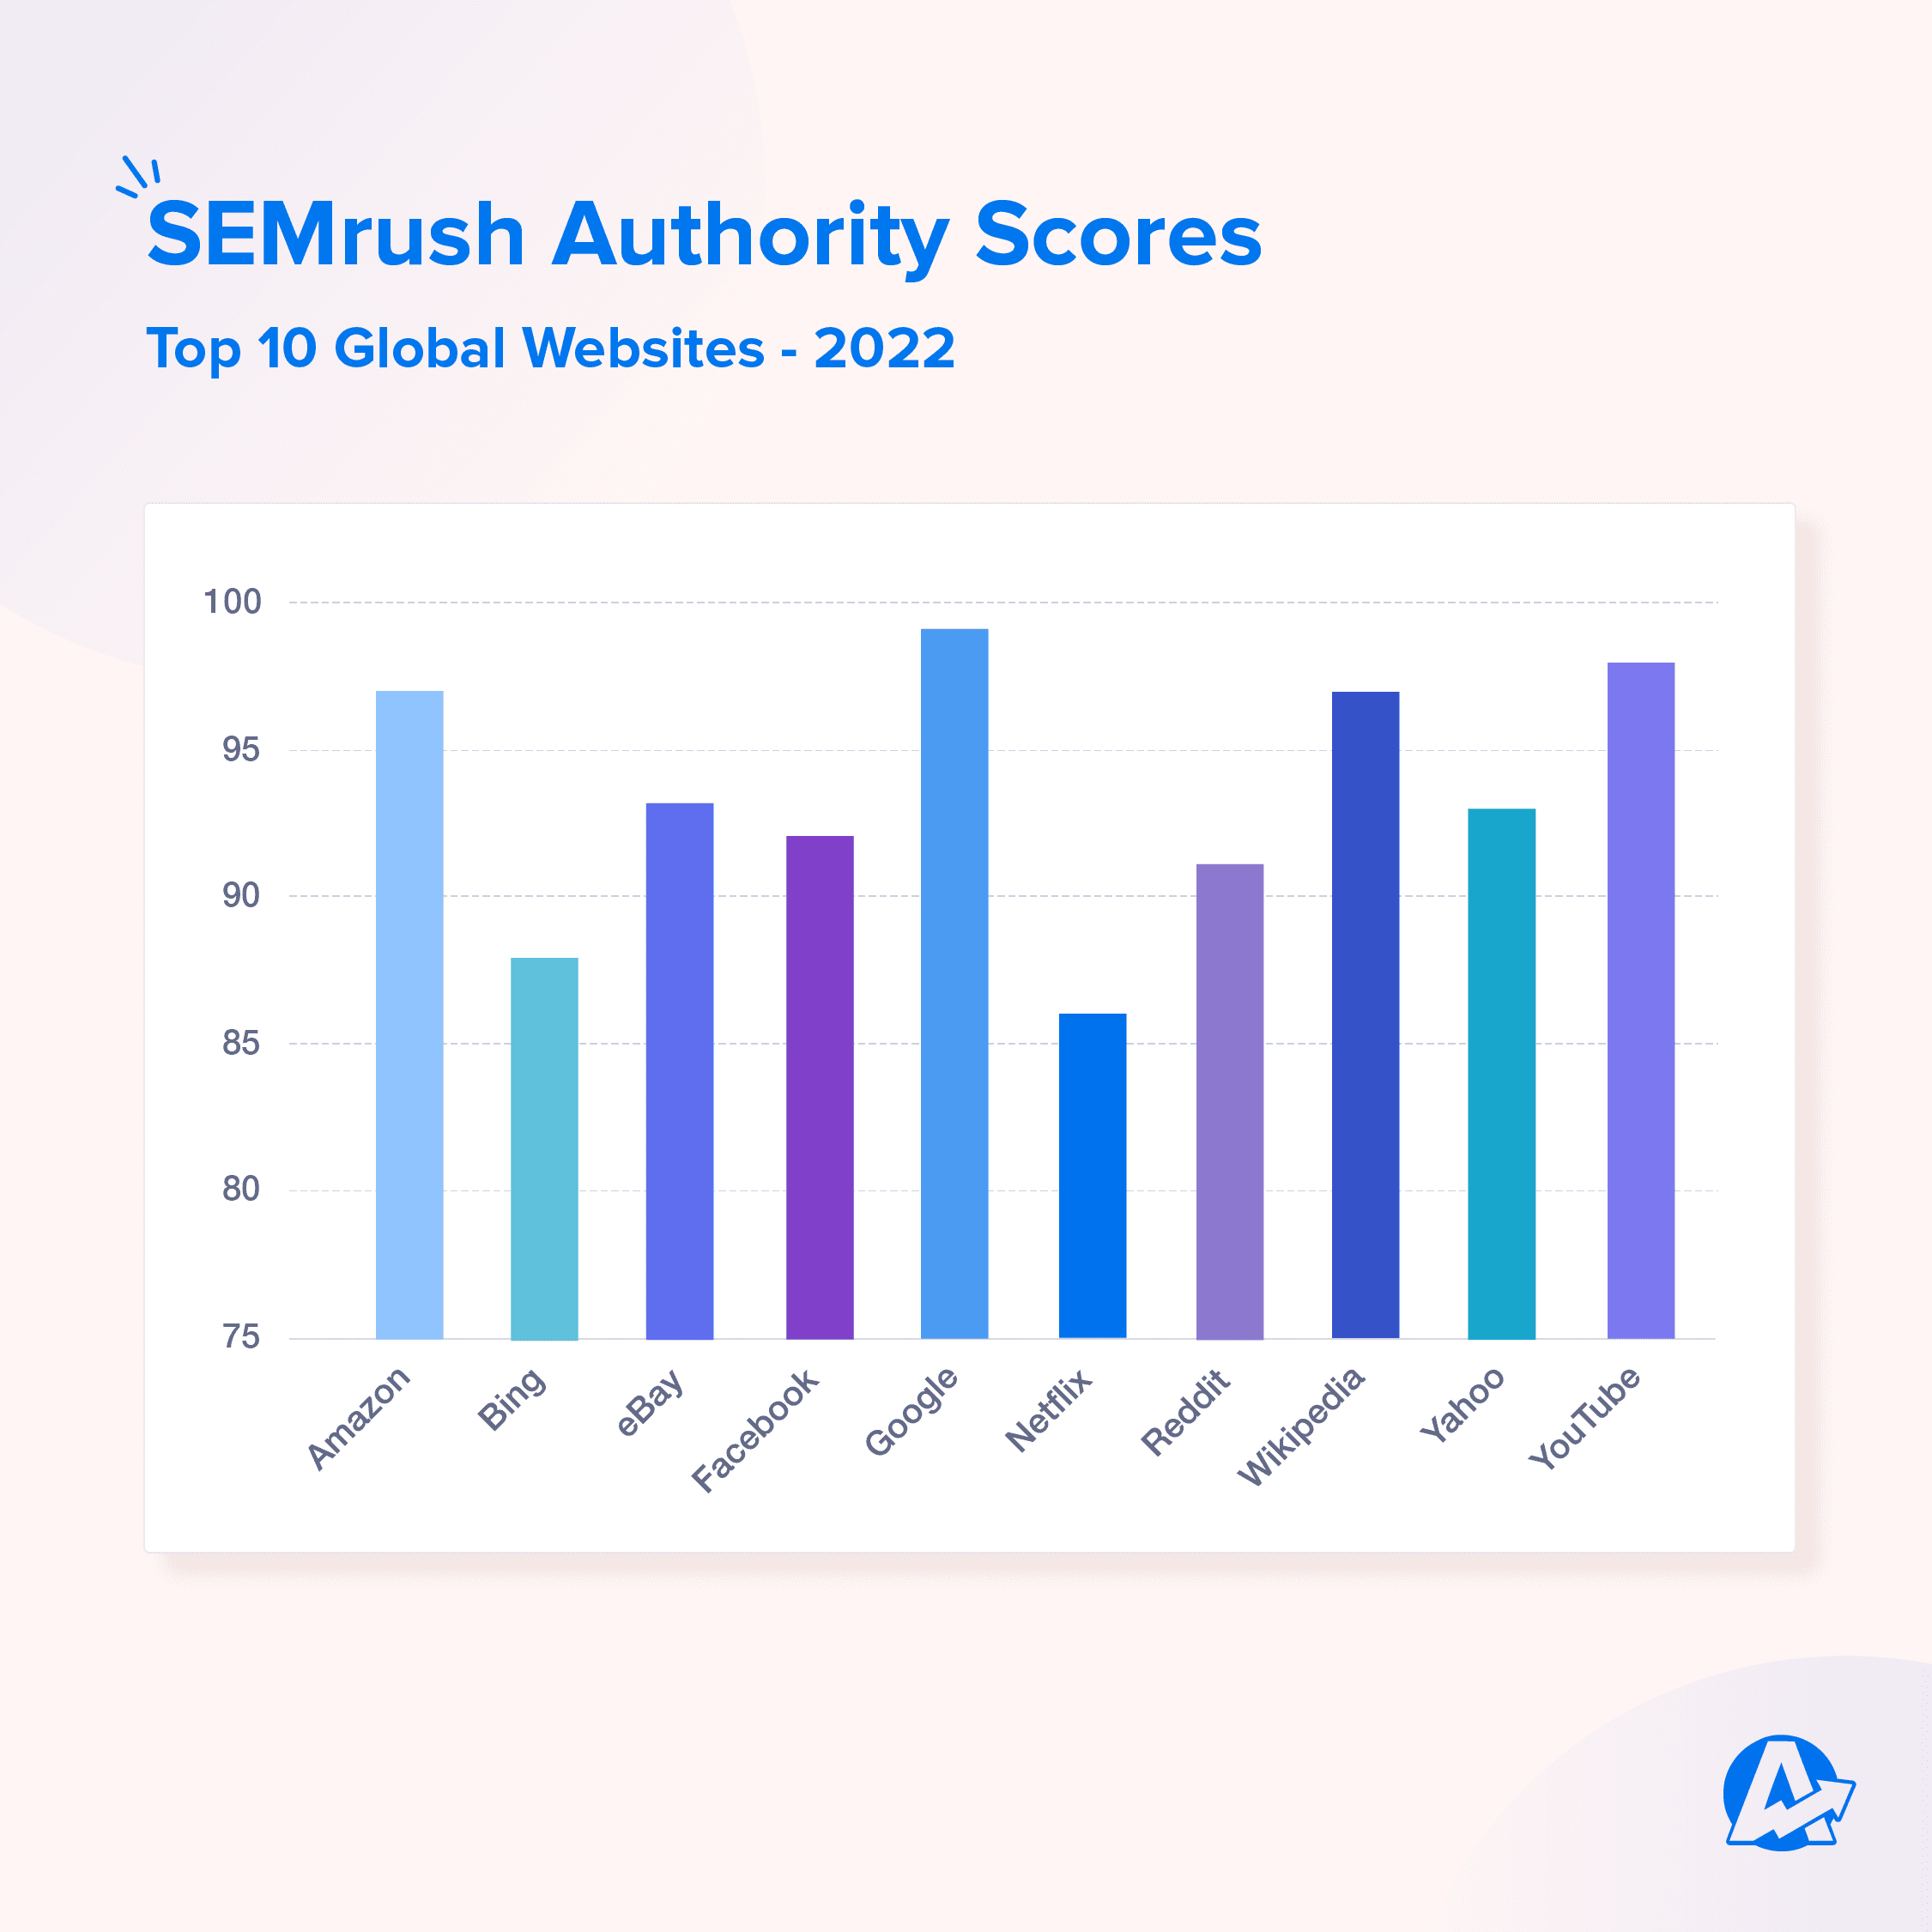 SEMrush Authority Scores for the Top 10 Global Websites